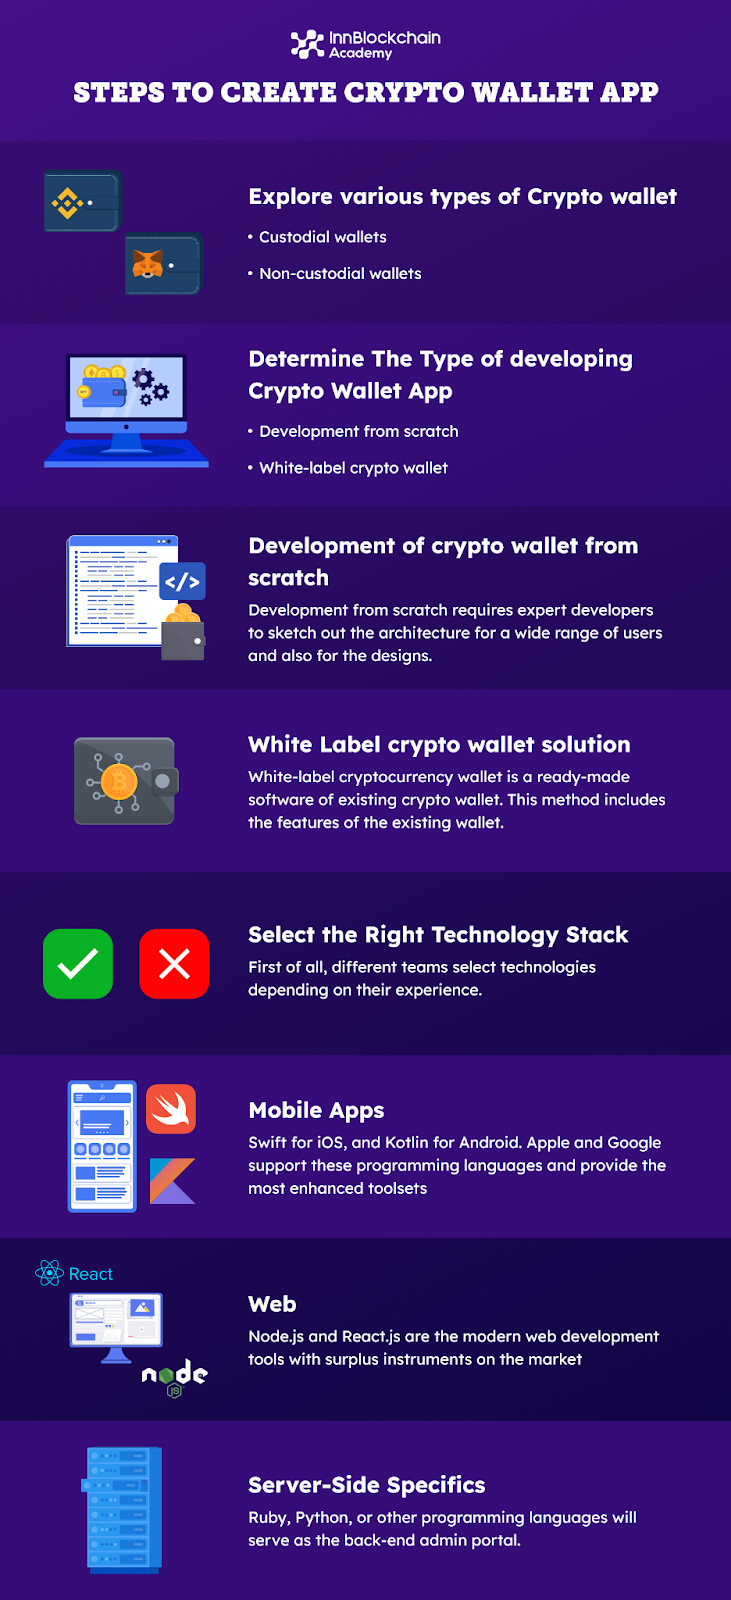 Steps to create crypto wallet app